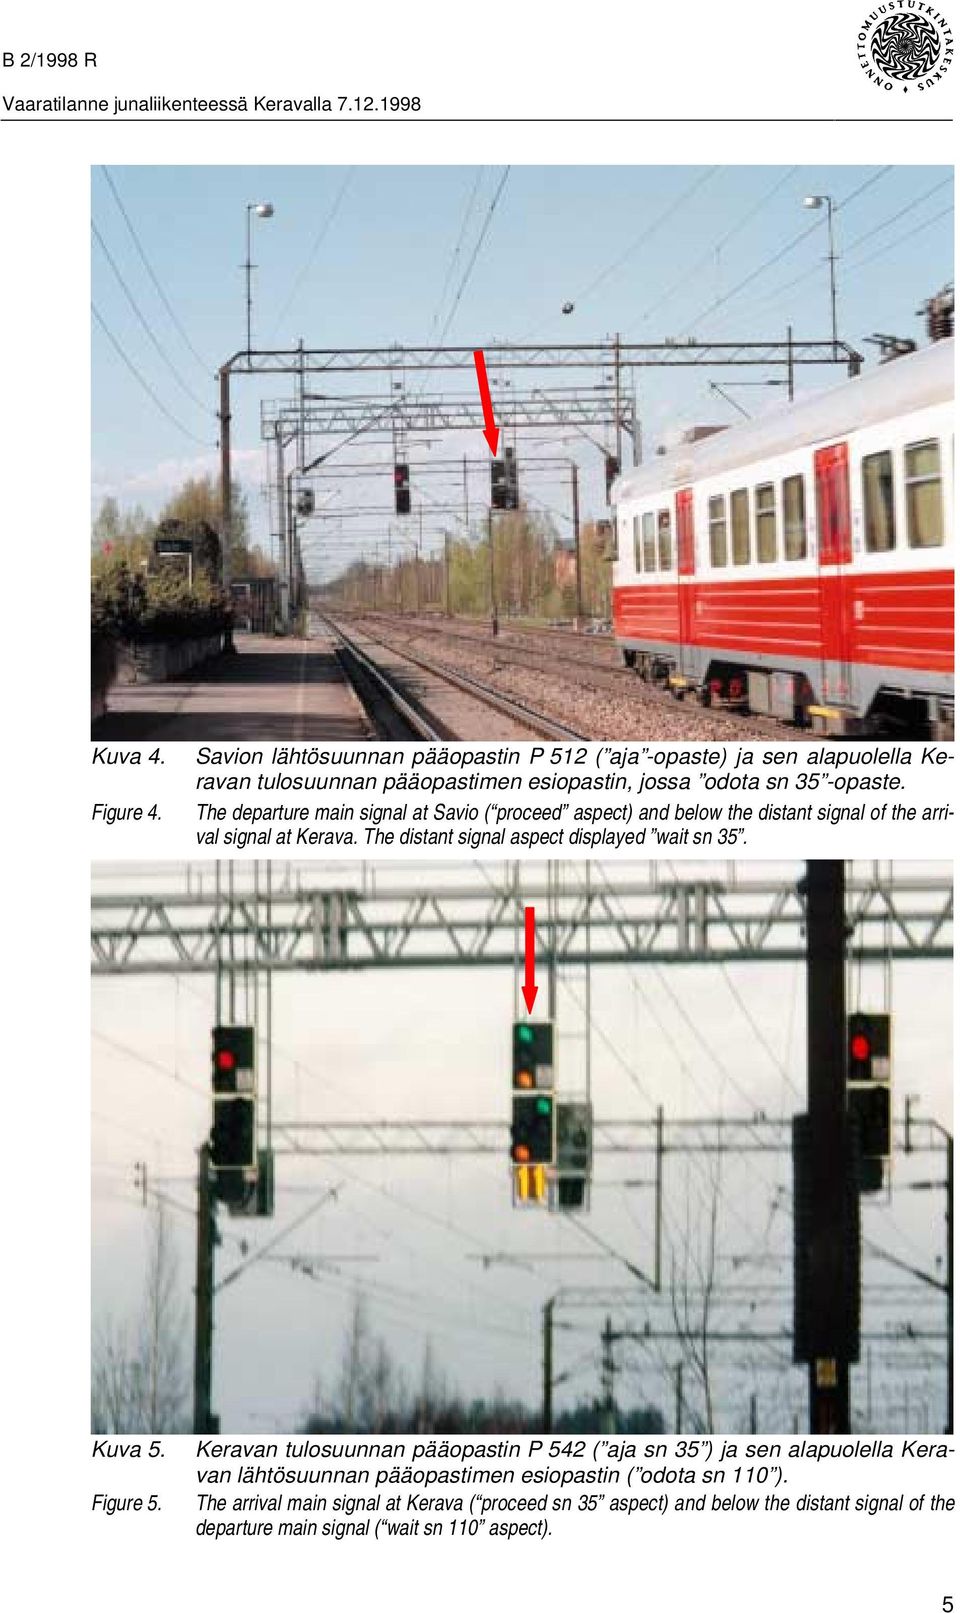 The departure main signal at Savio ( proceed aspect) and below the distant signal of the arrival signal at Kerava.